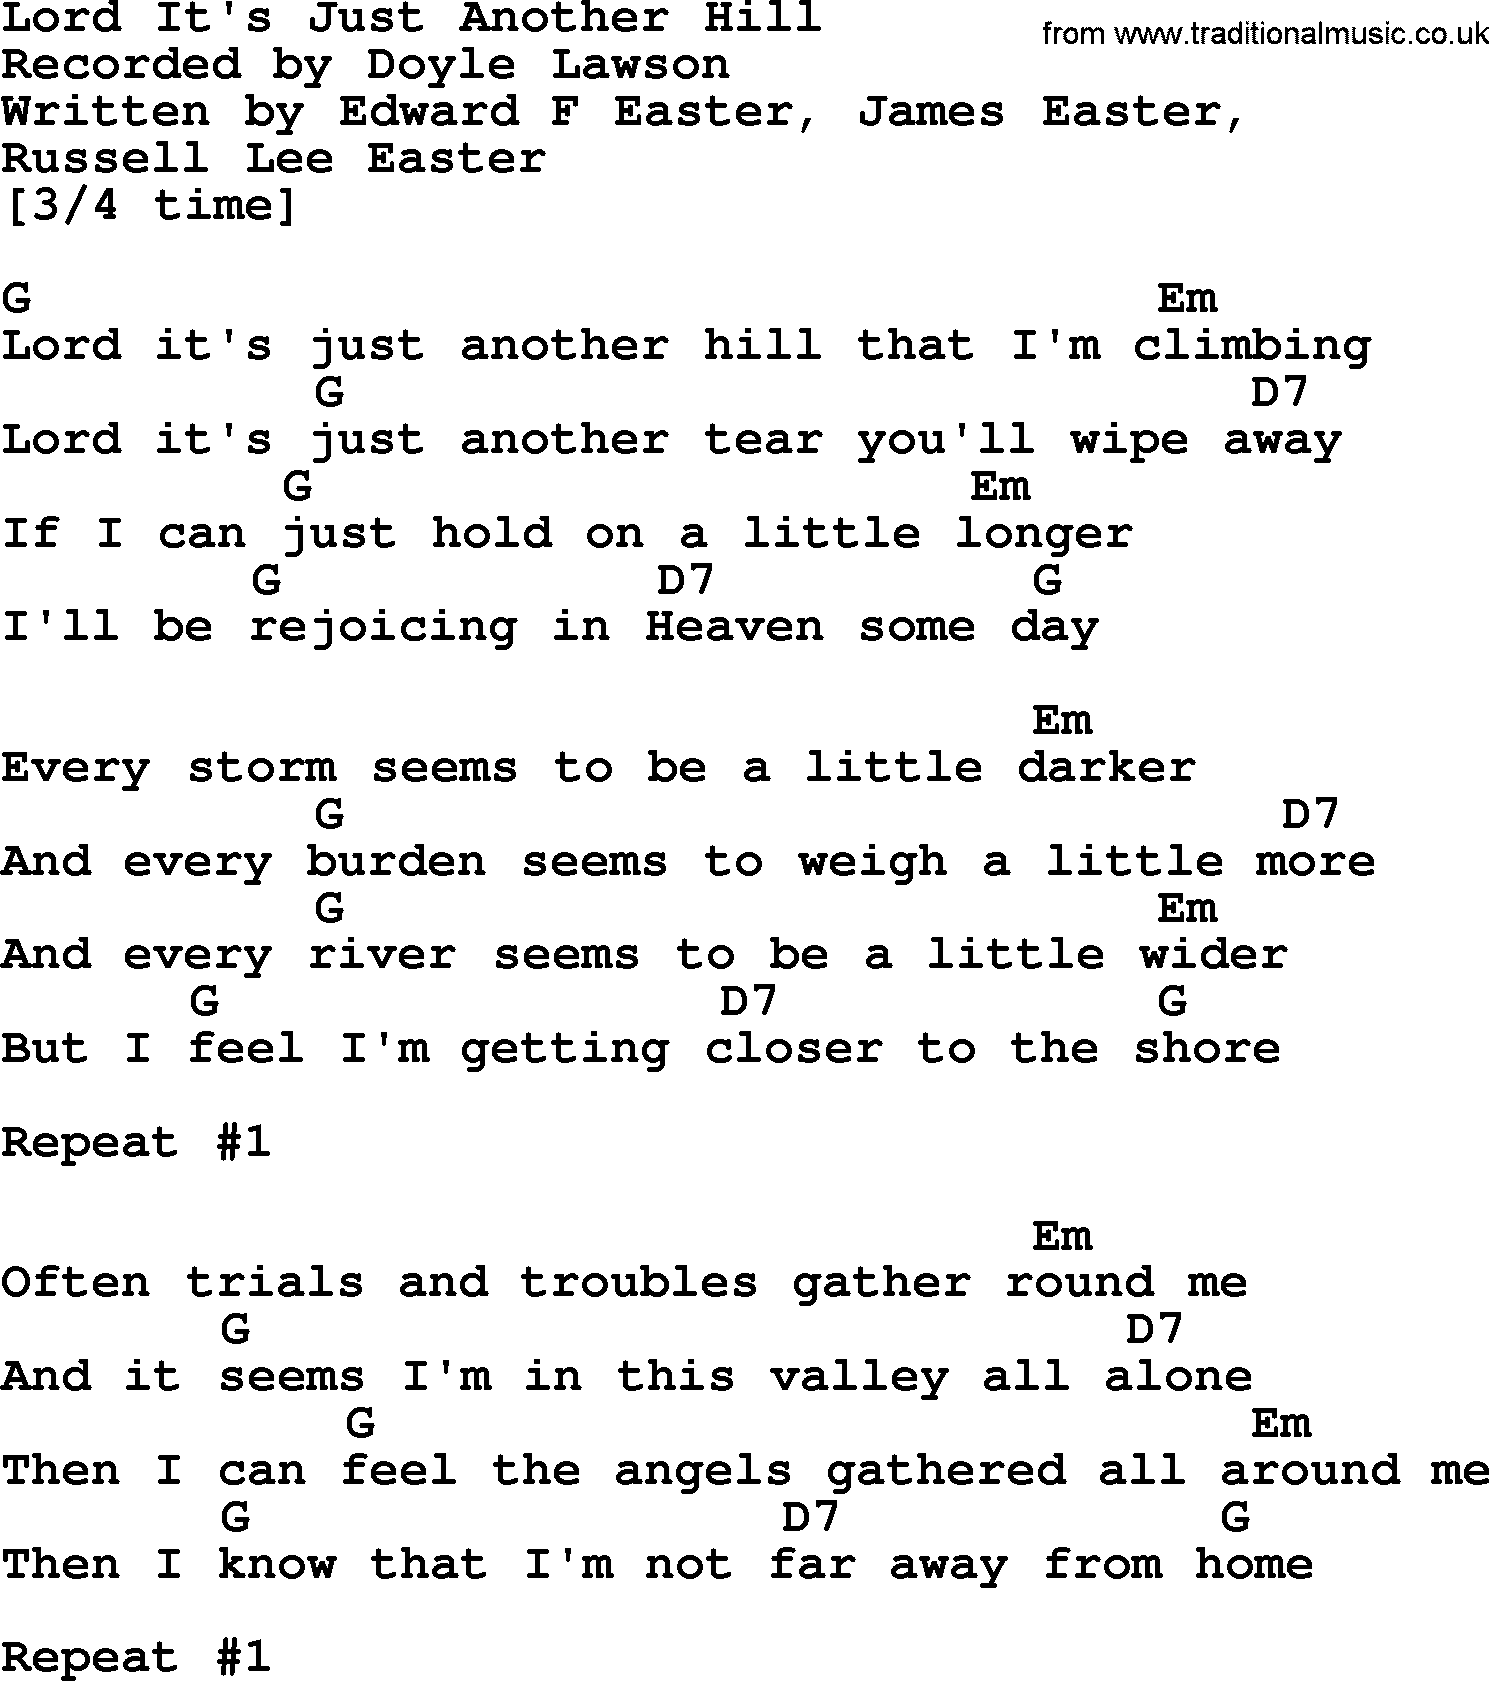 Bluegrass song: Lord It's Just Another Hill, lyrics and chords